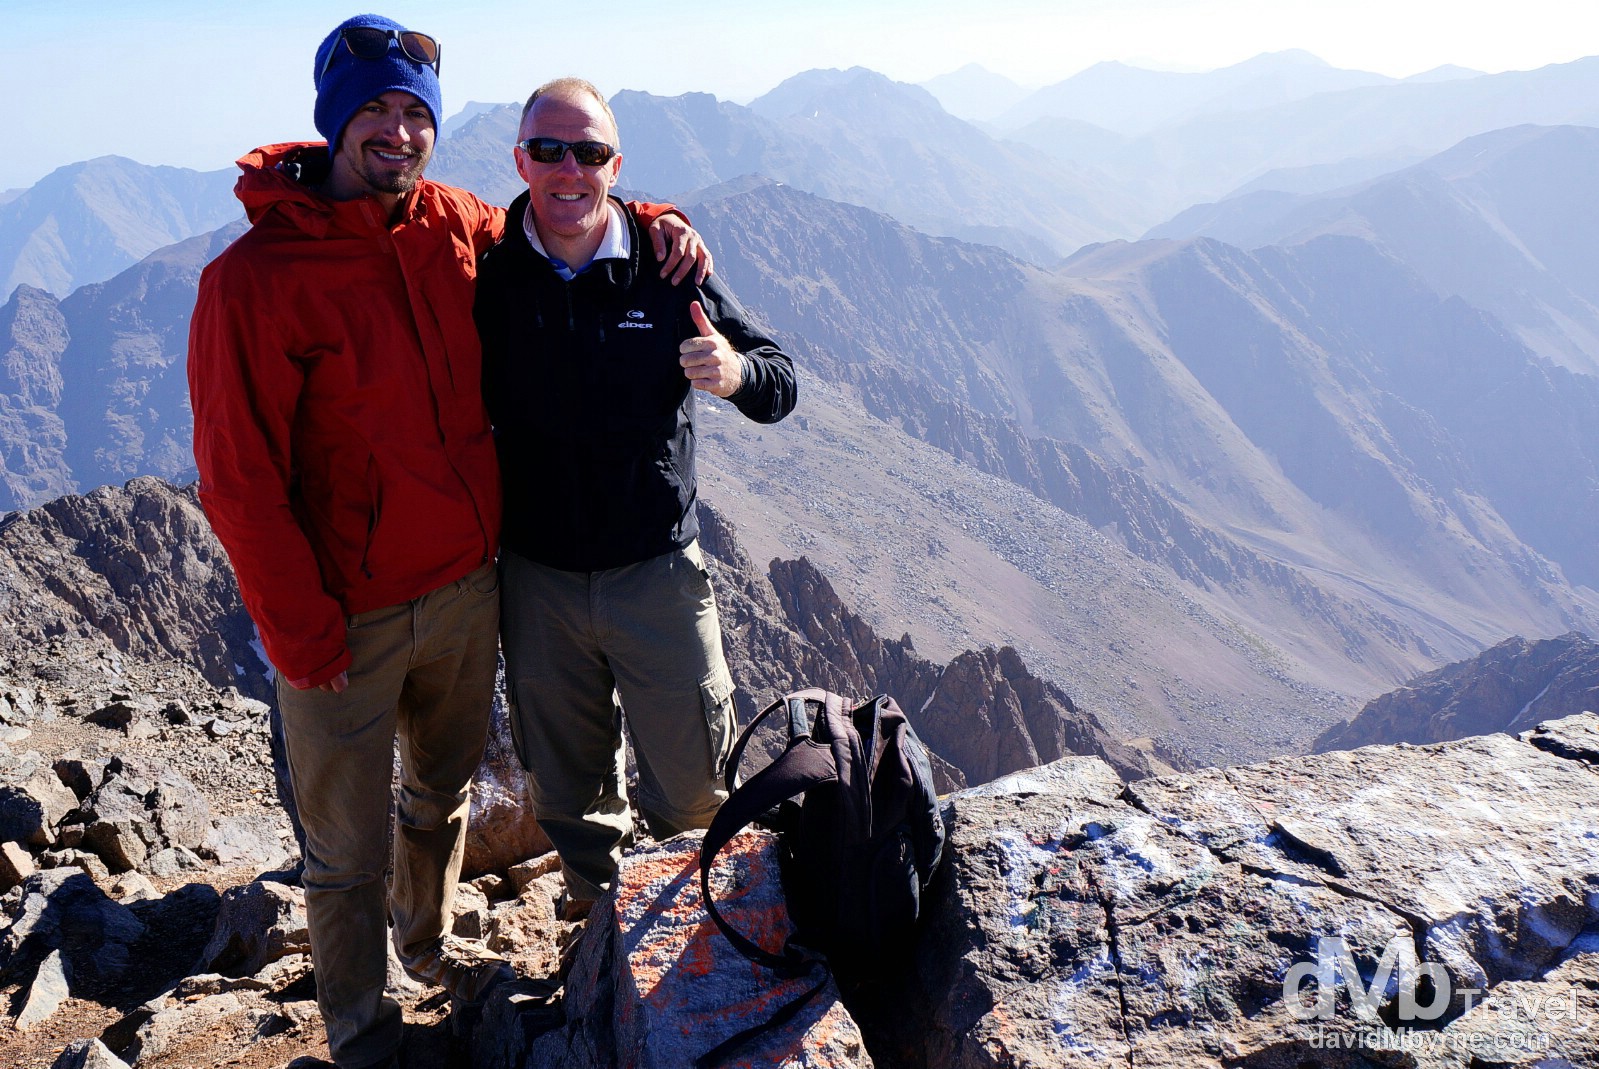 On the 4,176-metre summit of Jebel Toubkal, the highest point in Northern Africa. Jebel Toubkal, High Atlas, central Morocco. May 12th, 2014.